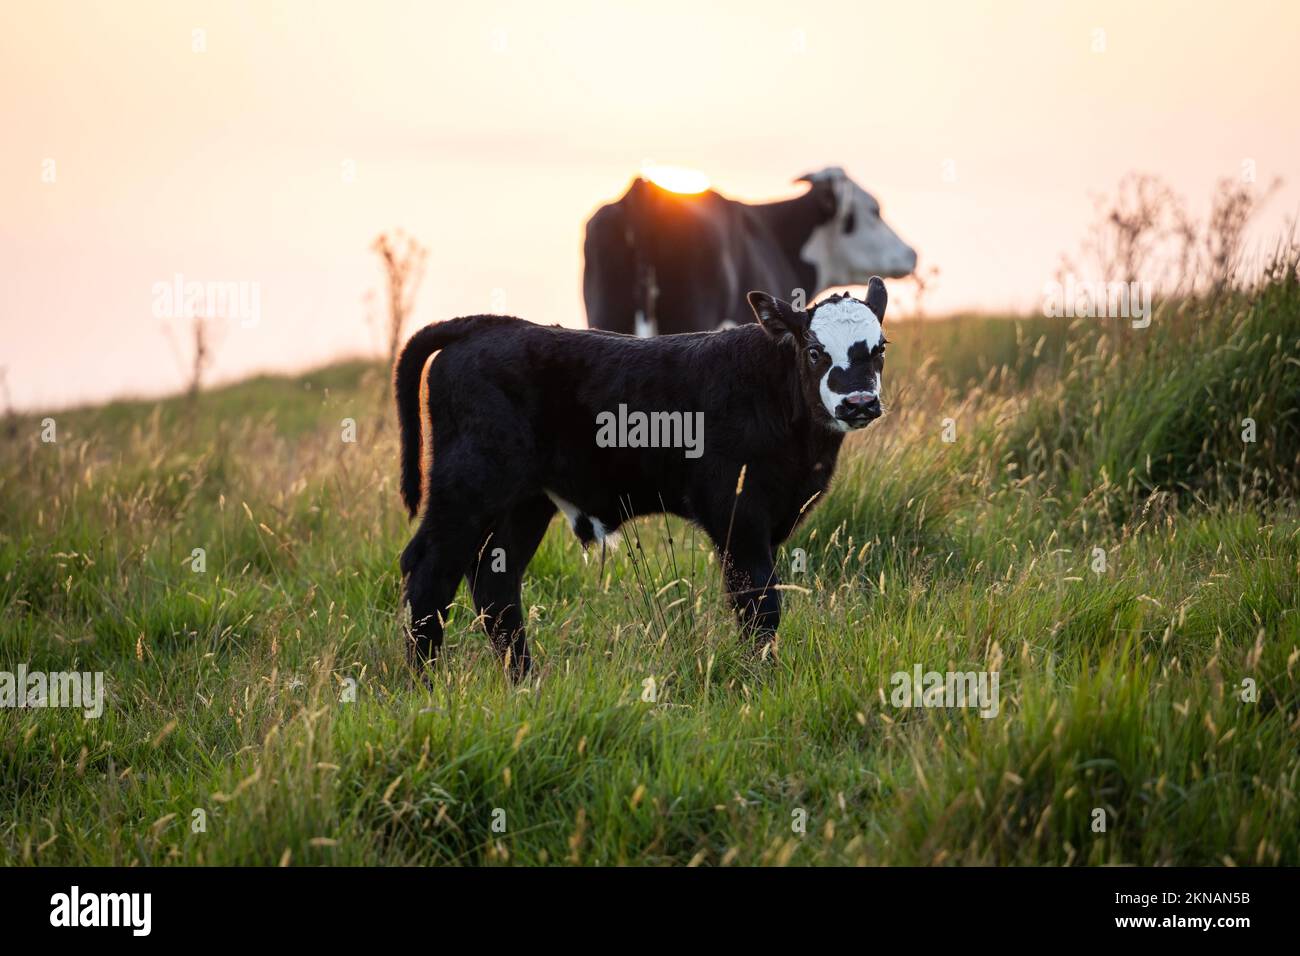 Cute funny calf, black and white adorable baby cow looking at the camera, with its mother and pasture at sunset background. Stock Photo